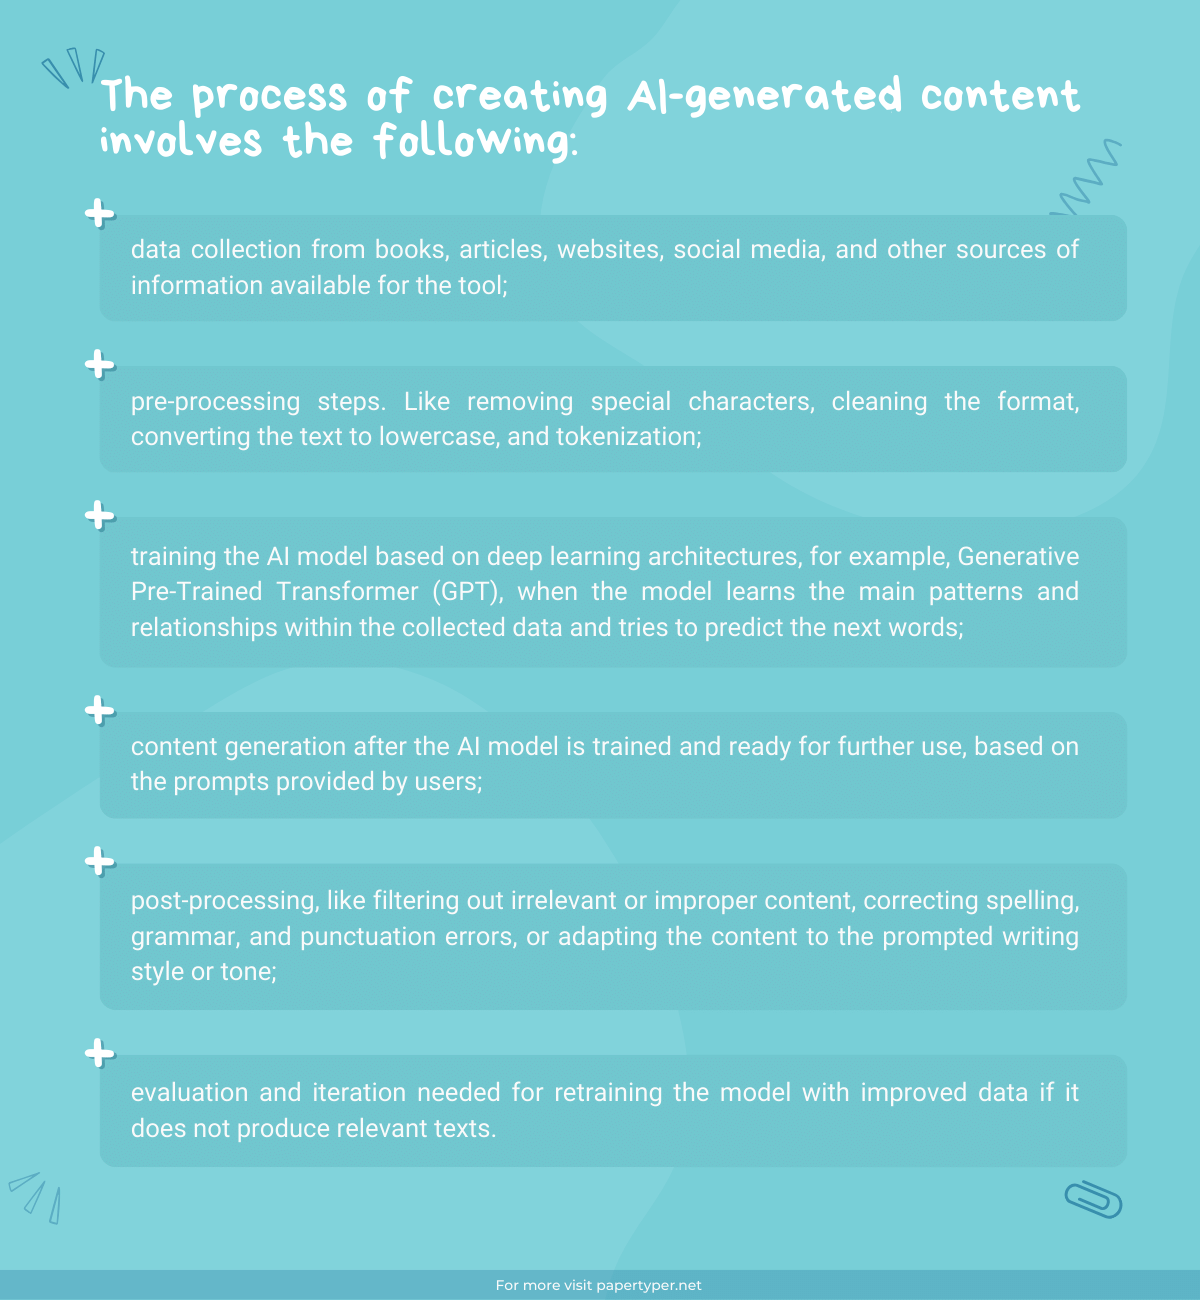 The process of creating AI-generated content